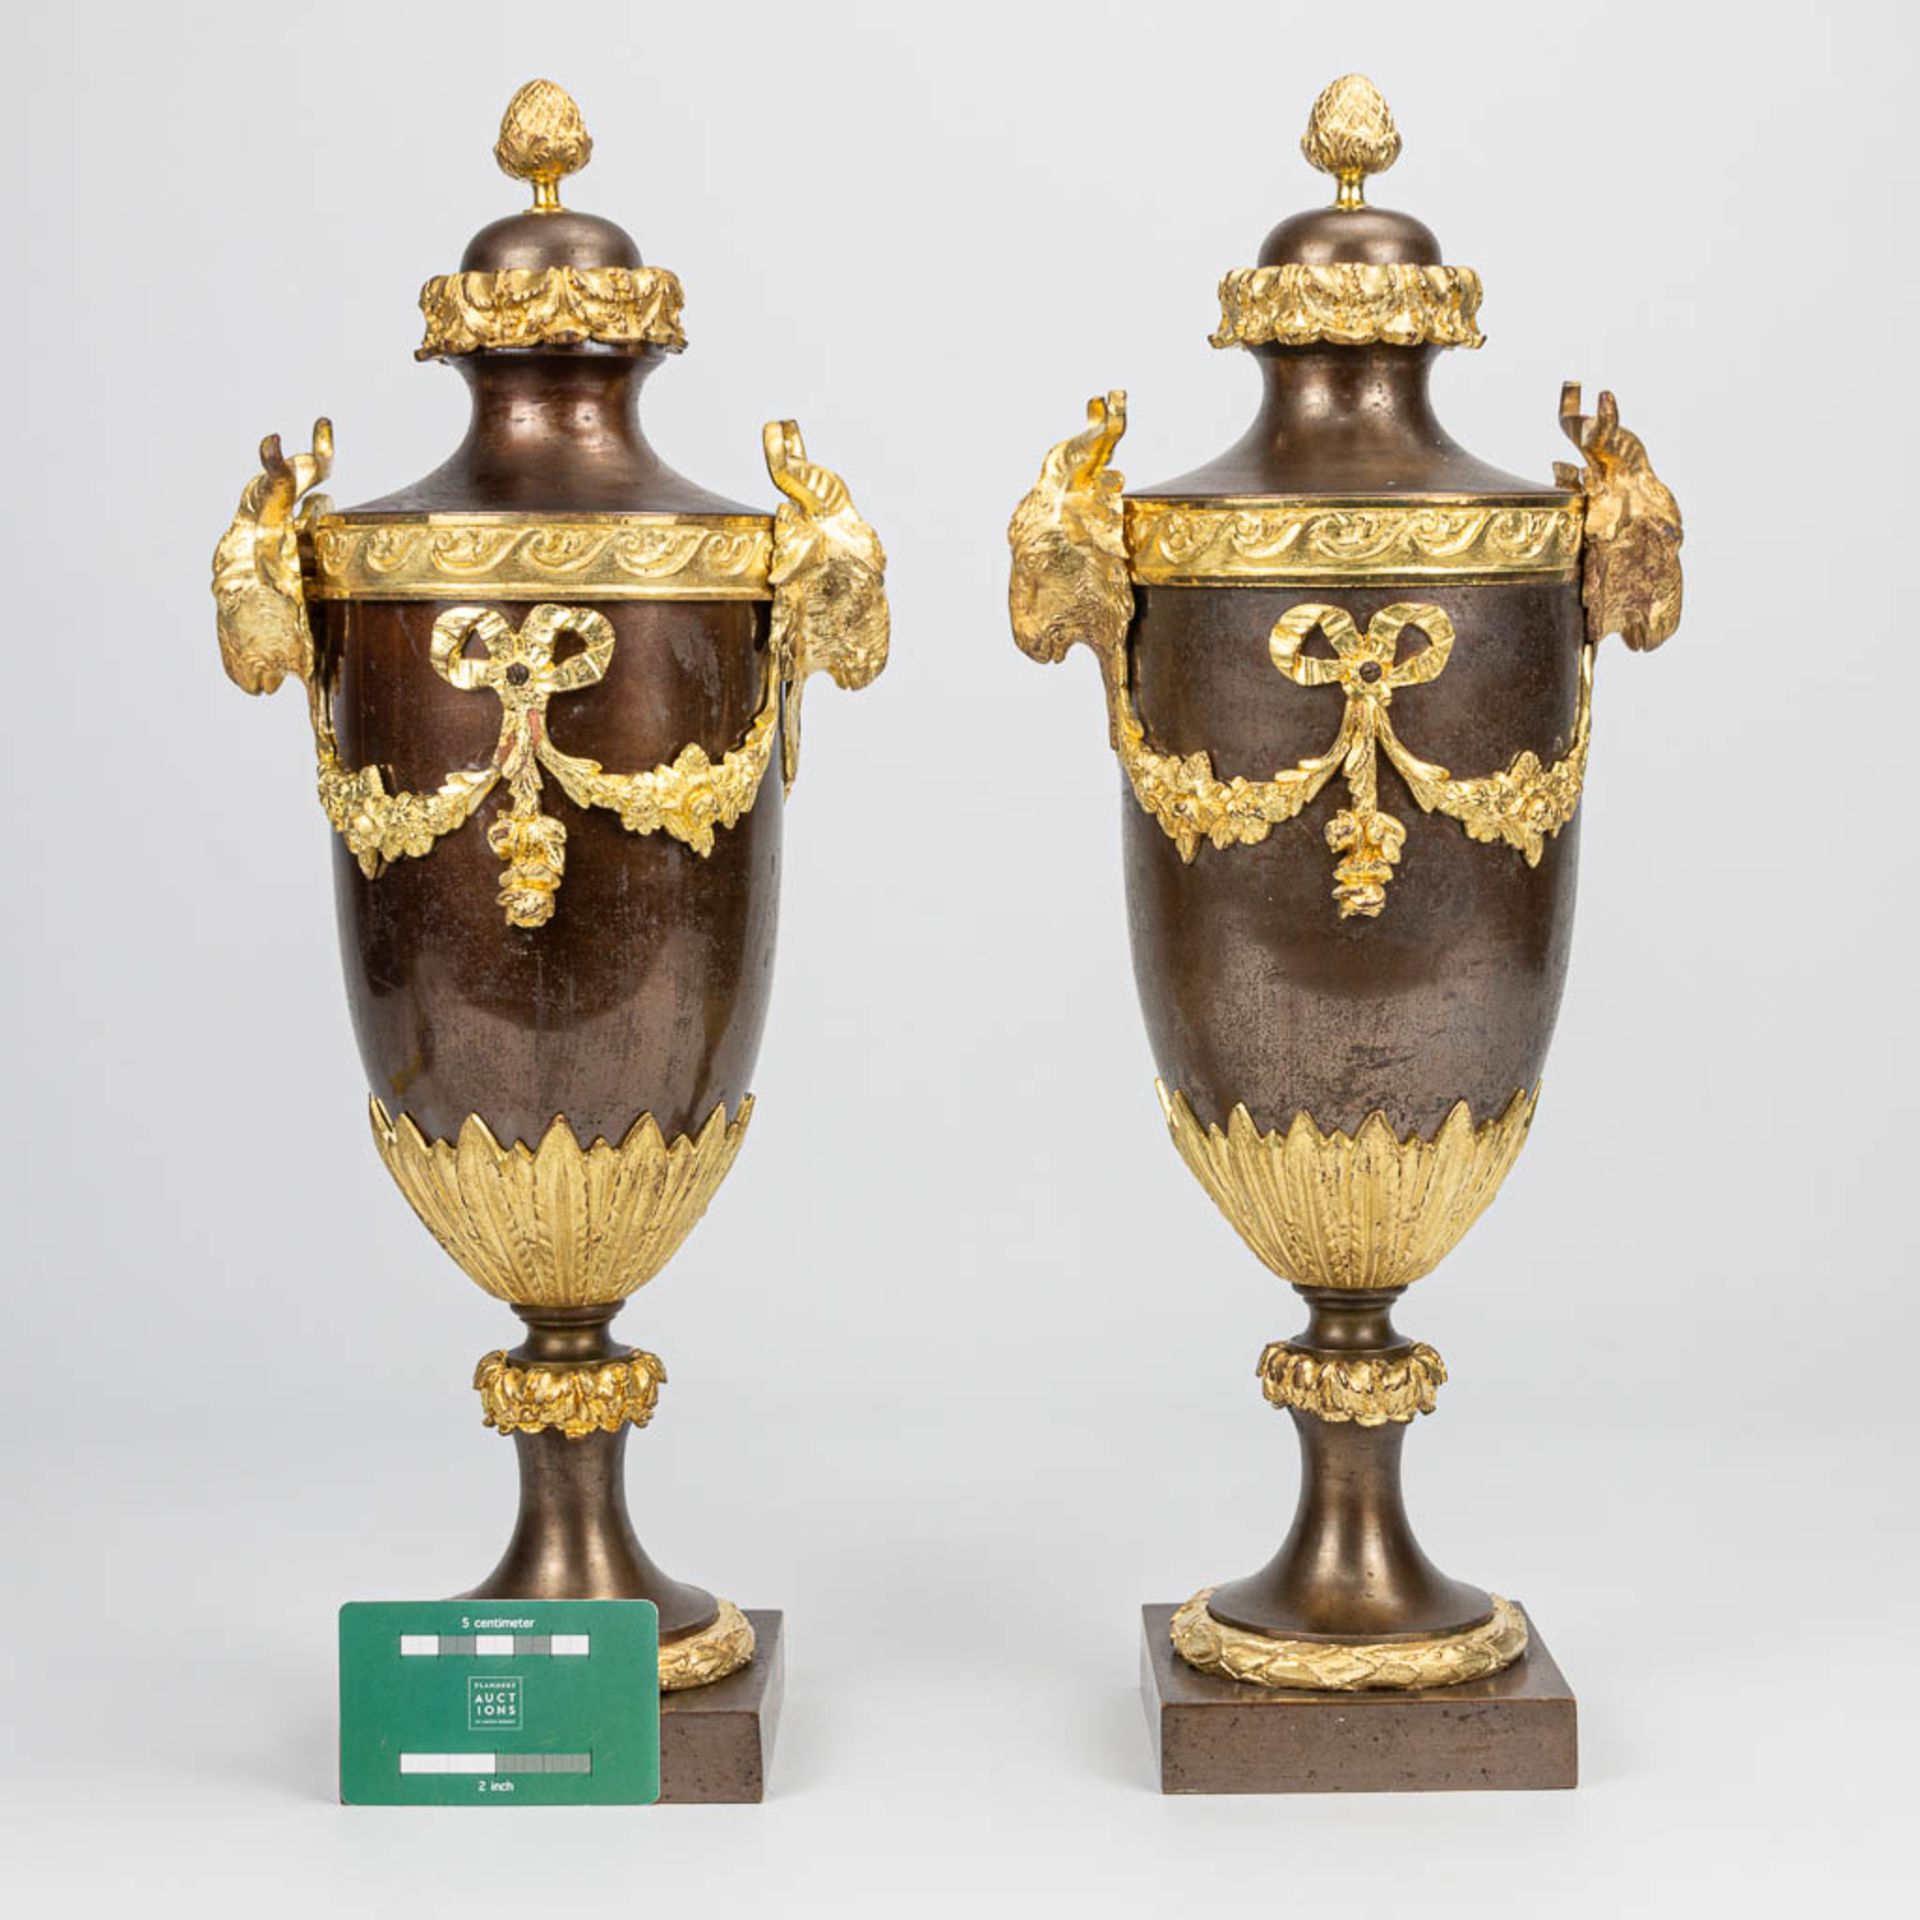 A pair of casolettes with ram's heads made of bronze and mounted with gilt bronze. Napoleon 3. (14 x - Image 4 of 8